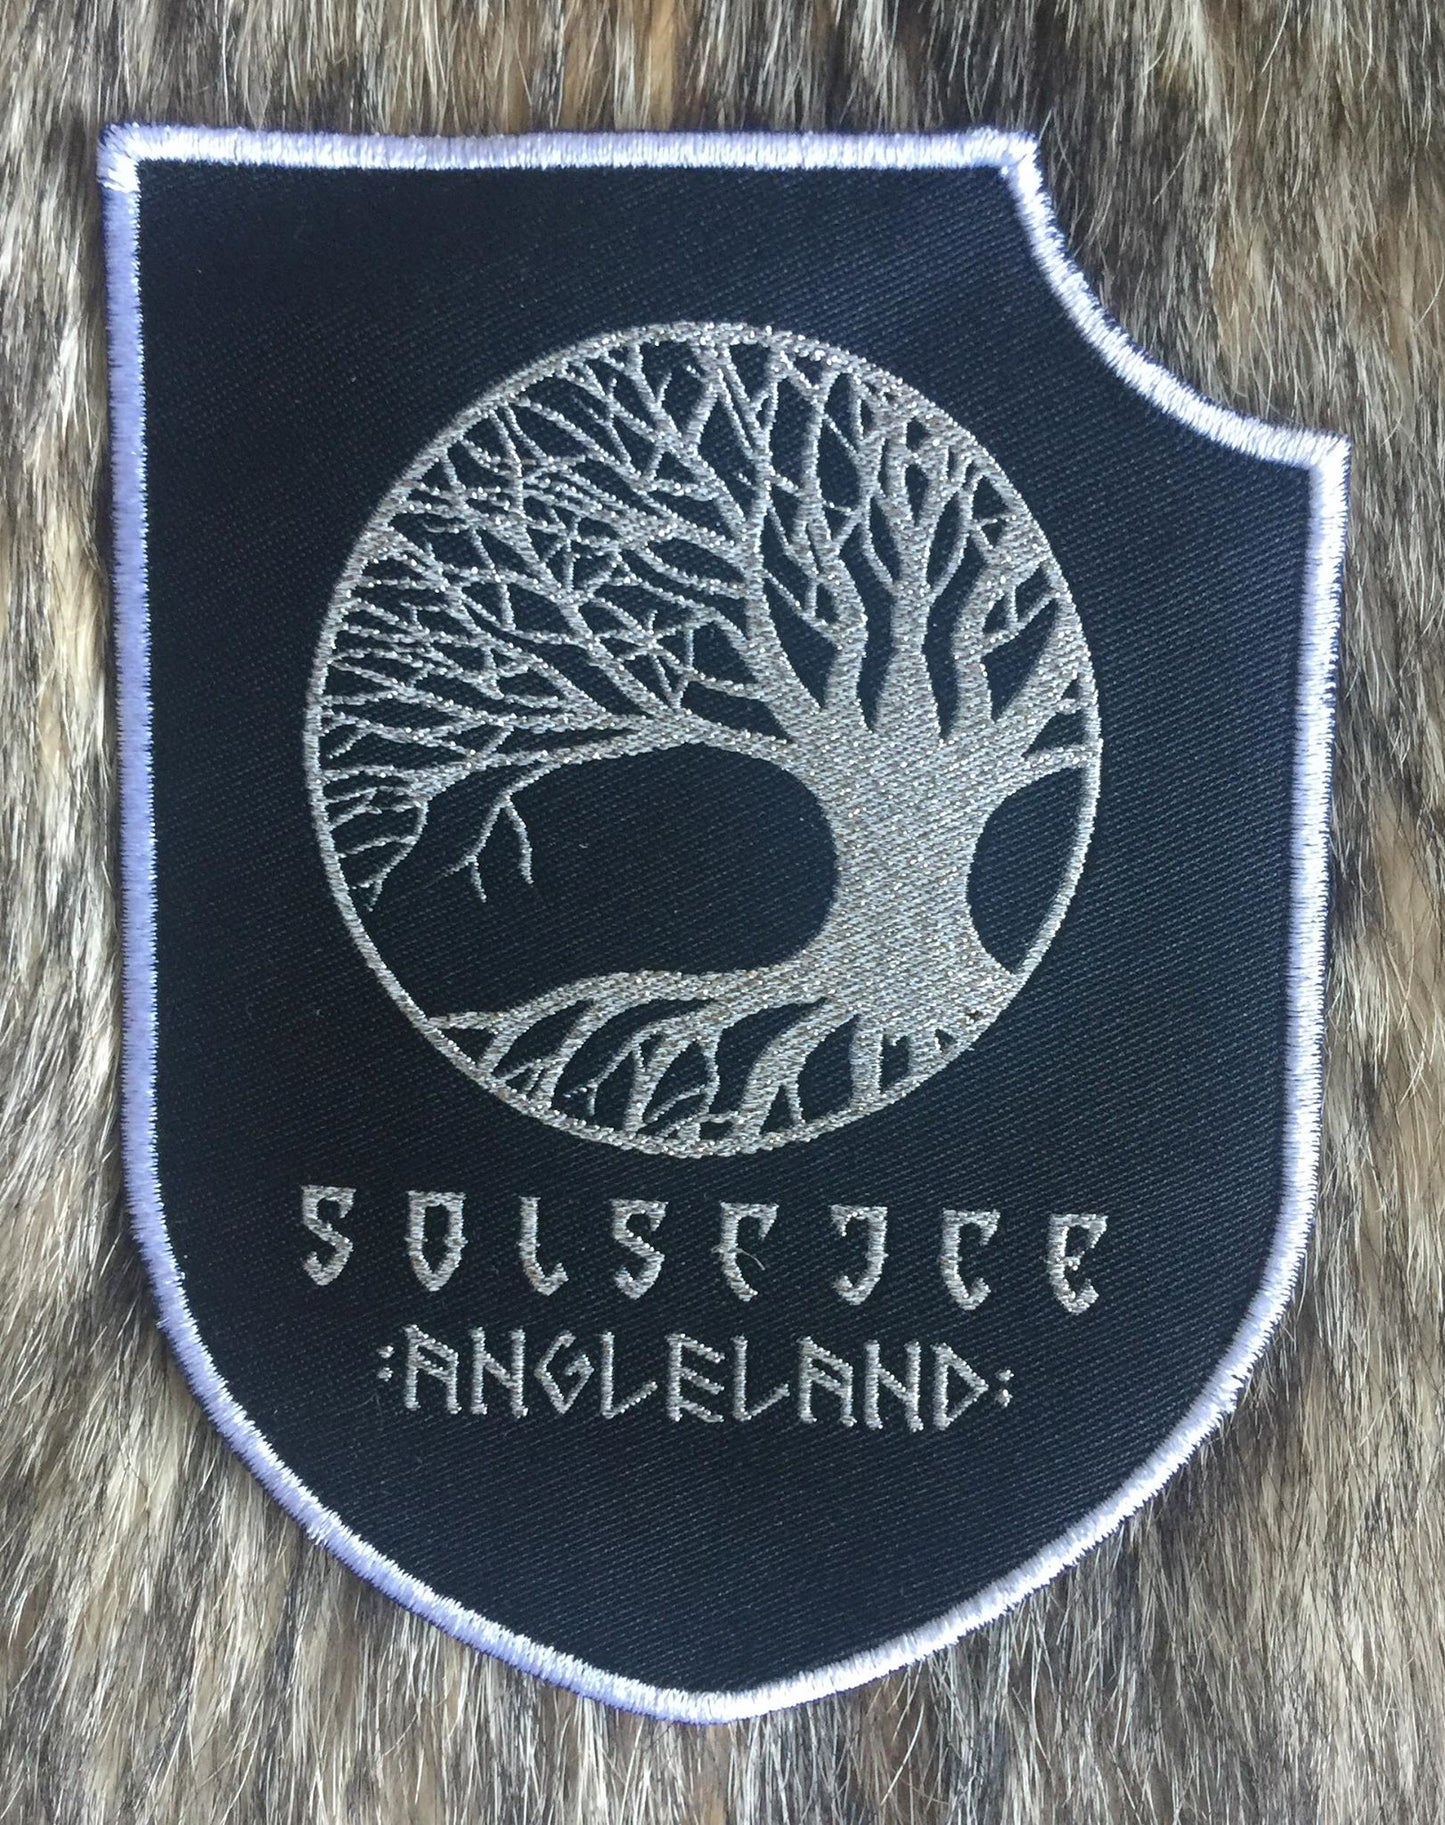 Solstice - Angleland Shield Shaped Limited Edition Patch